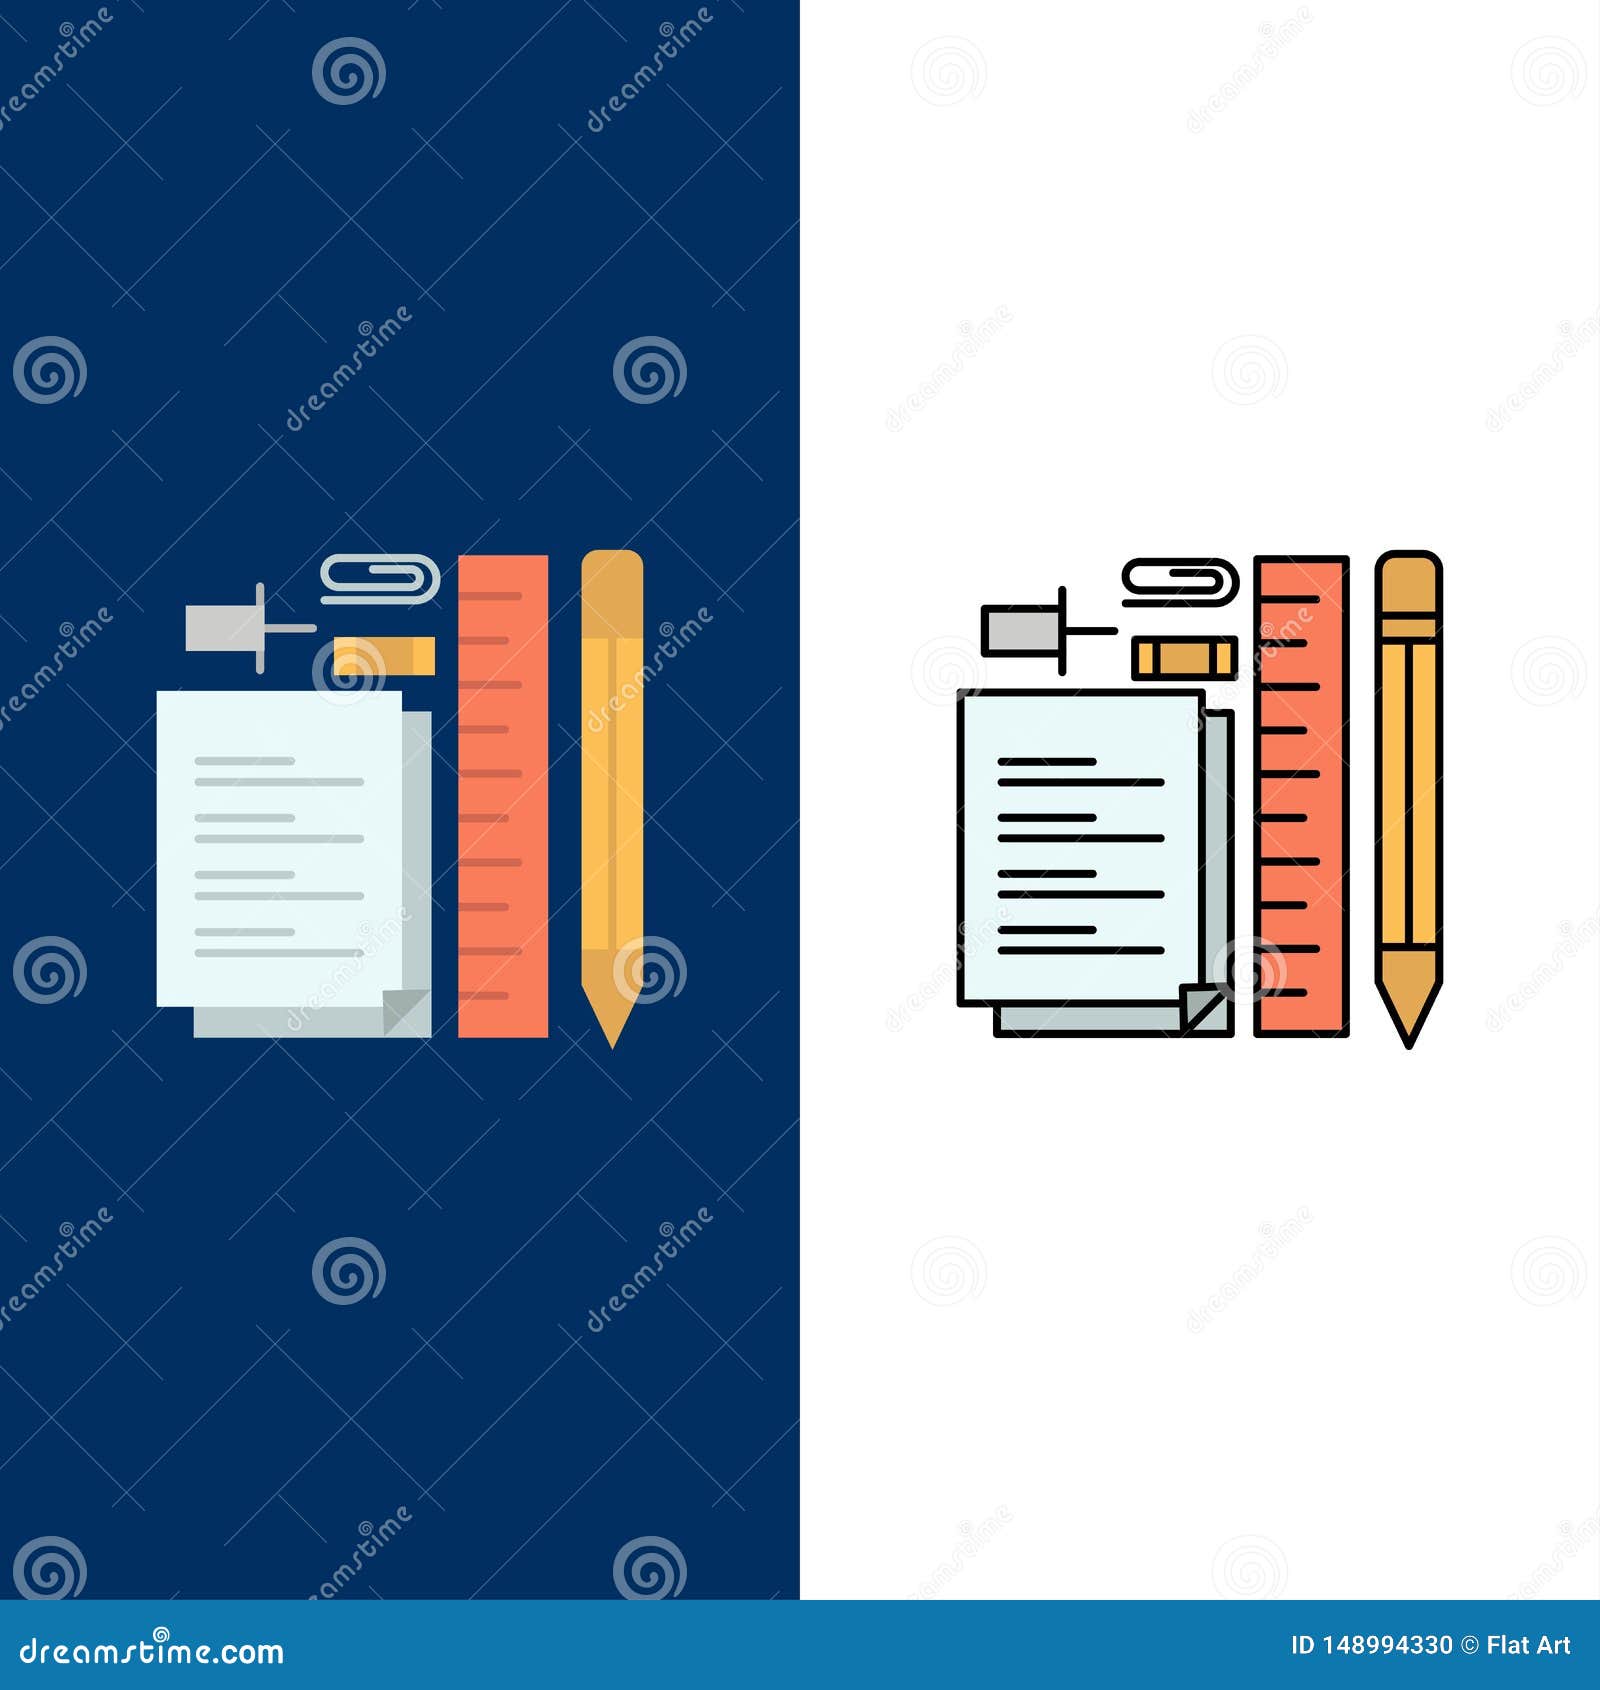 stationary, pencil, pen, notepad, pin  icons. flat and line filled icon set  blue background